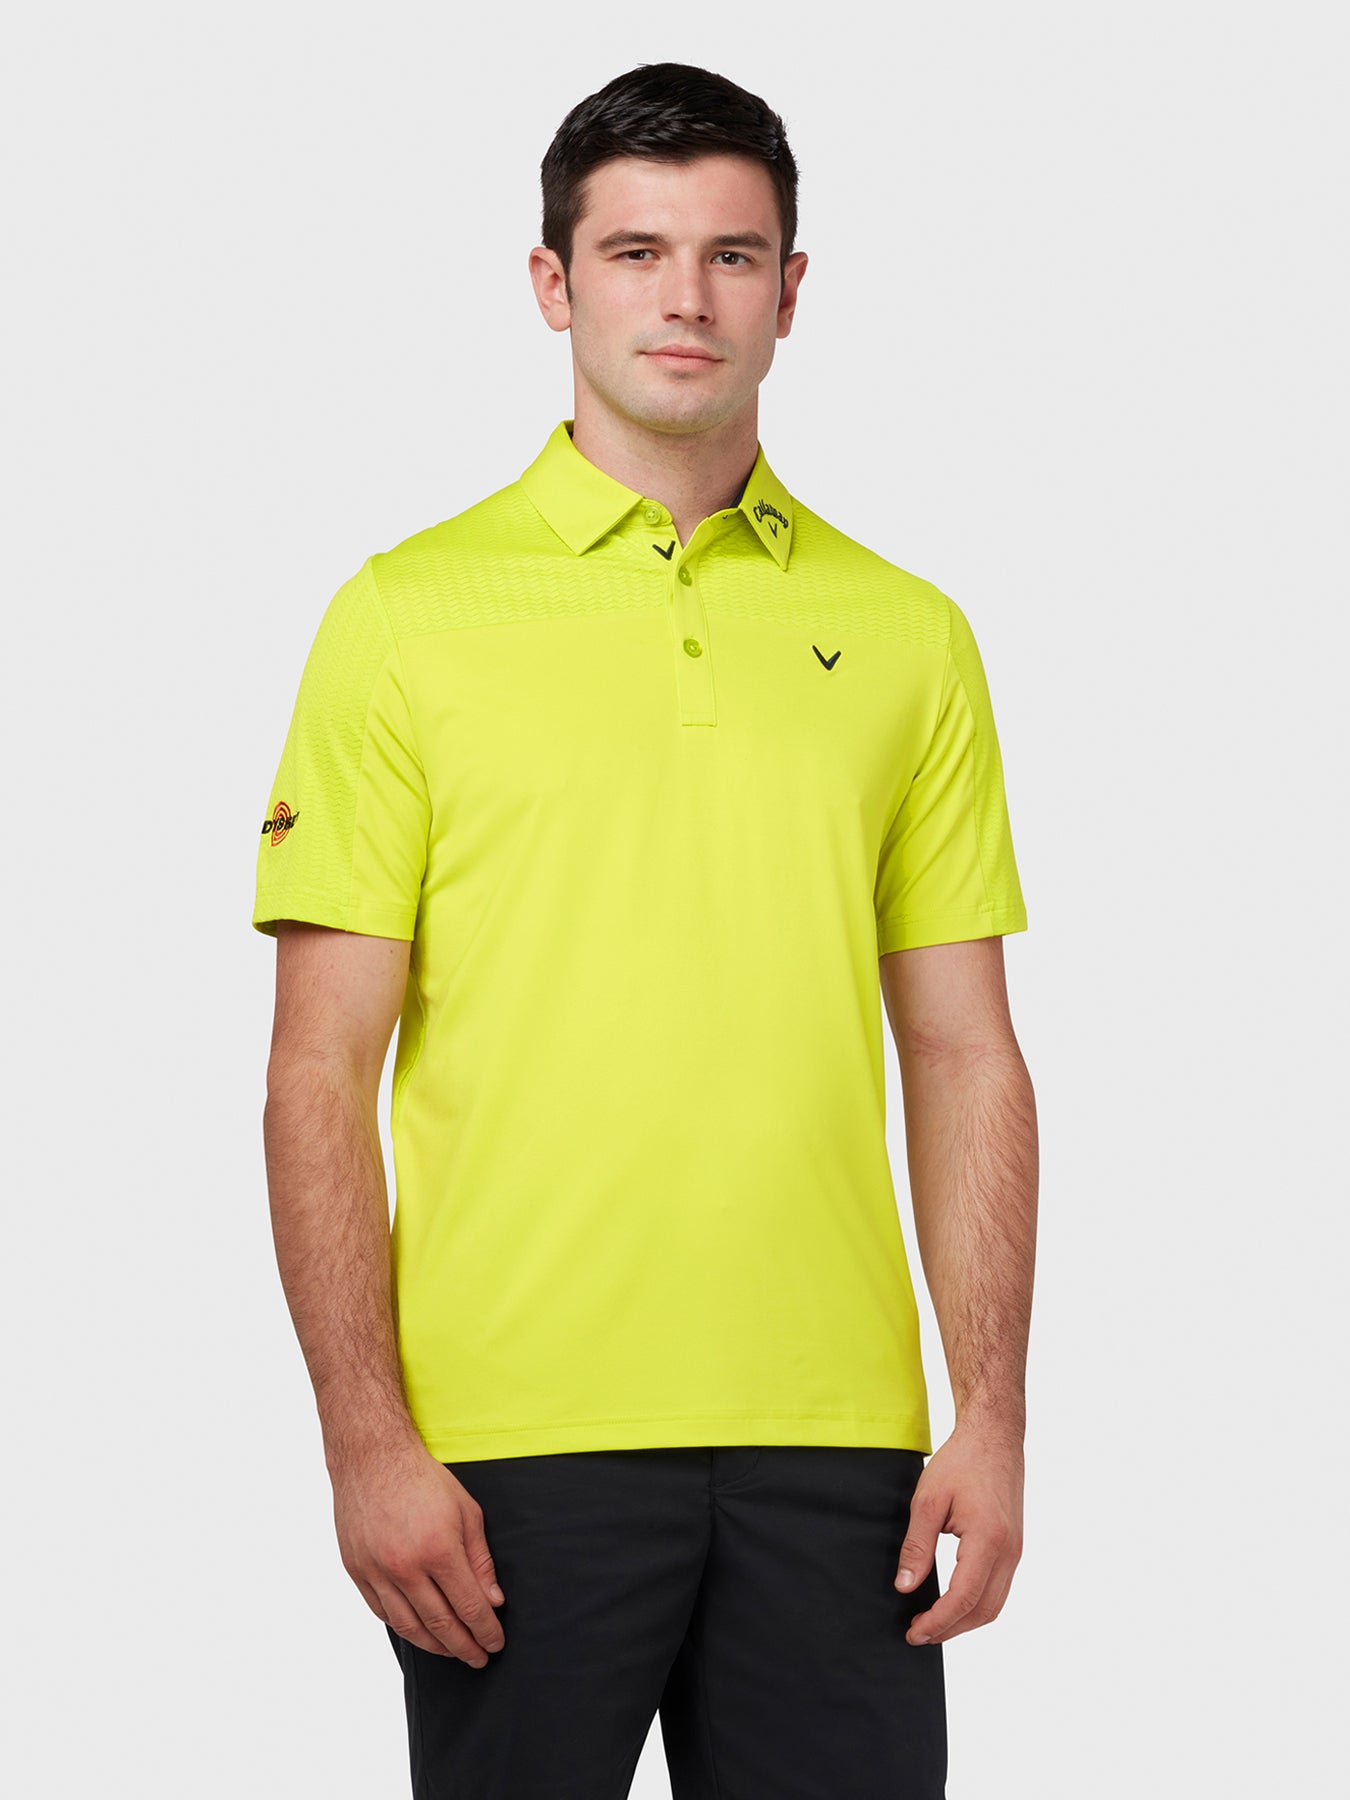 View Odyssesy Ventilated Polo In Surreal Green information